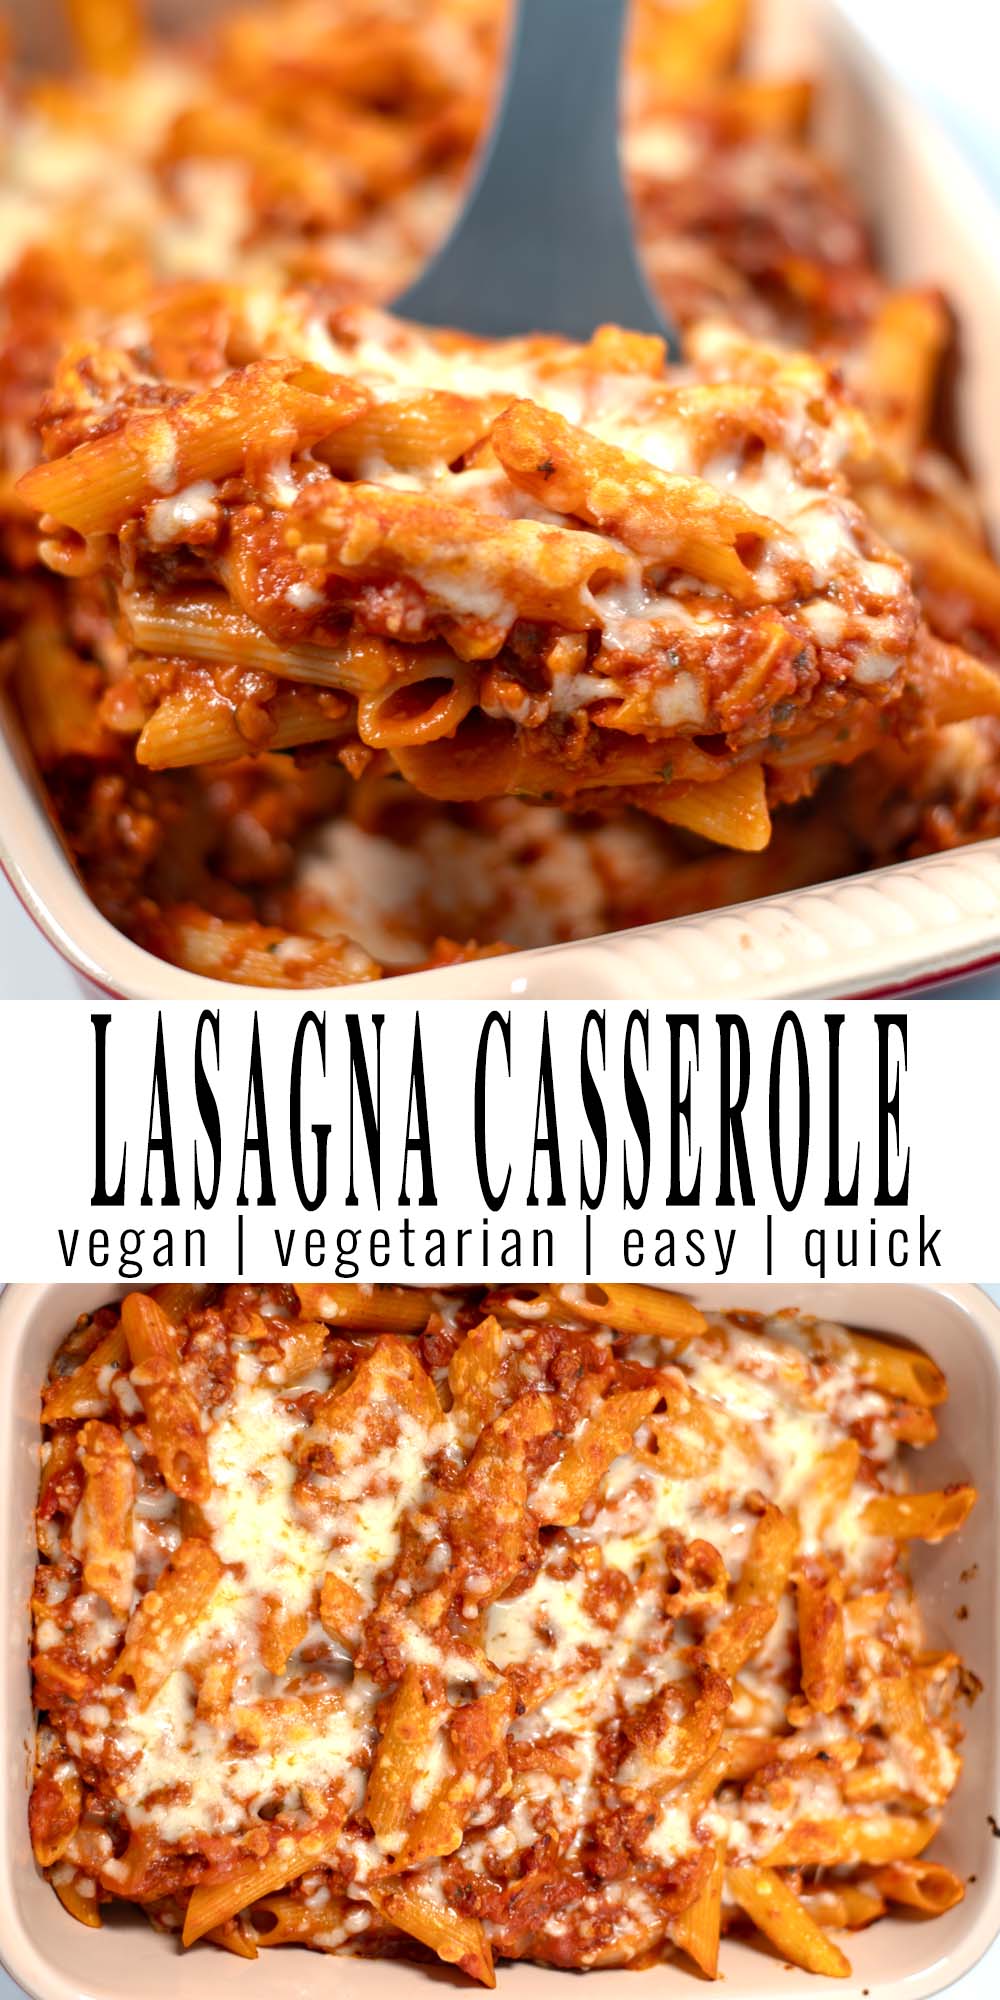 Collage of two pictures showing Lasagna Casserole with recipe title text.